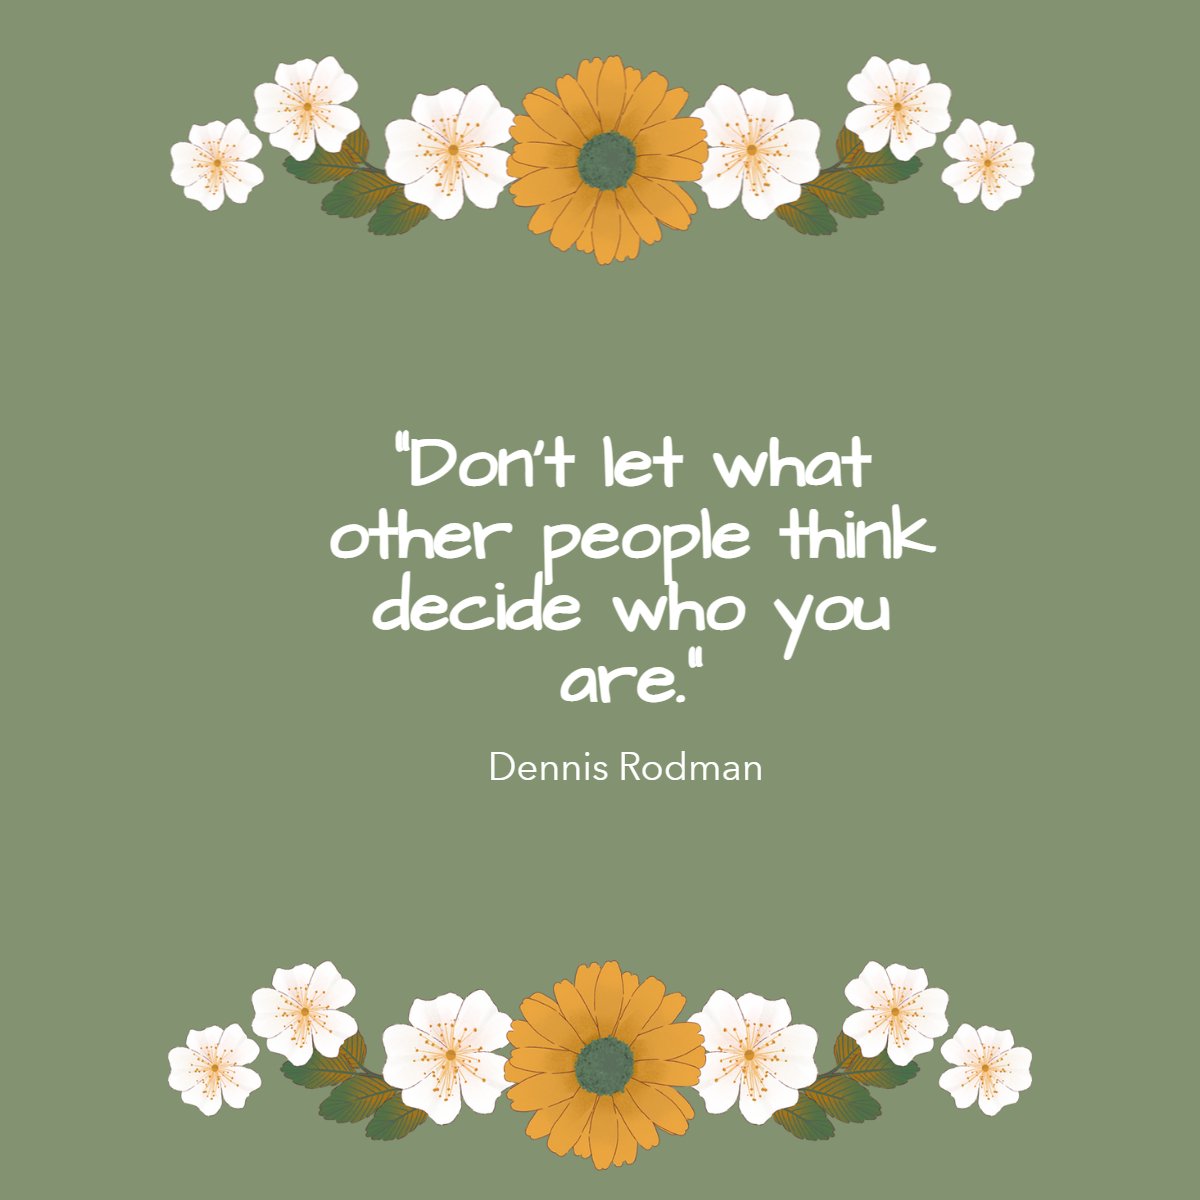 “Don't let what other people think decide who you are.” — Dennis Rodman #Motivation #DennisRodman #quoteoftheday✏️ #quotestagram #RacingRealEstateAgent #BarrettRealEstate #StoneTreeRealEstateTeam #maricopaazrealestate #racingagent #arizonarealestate